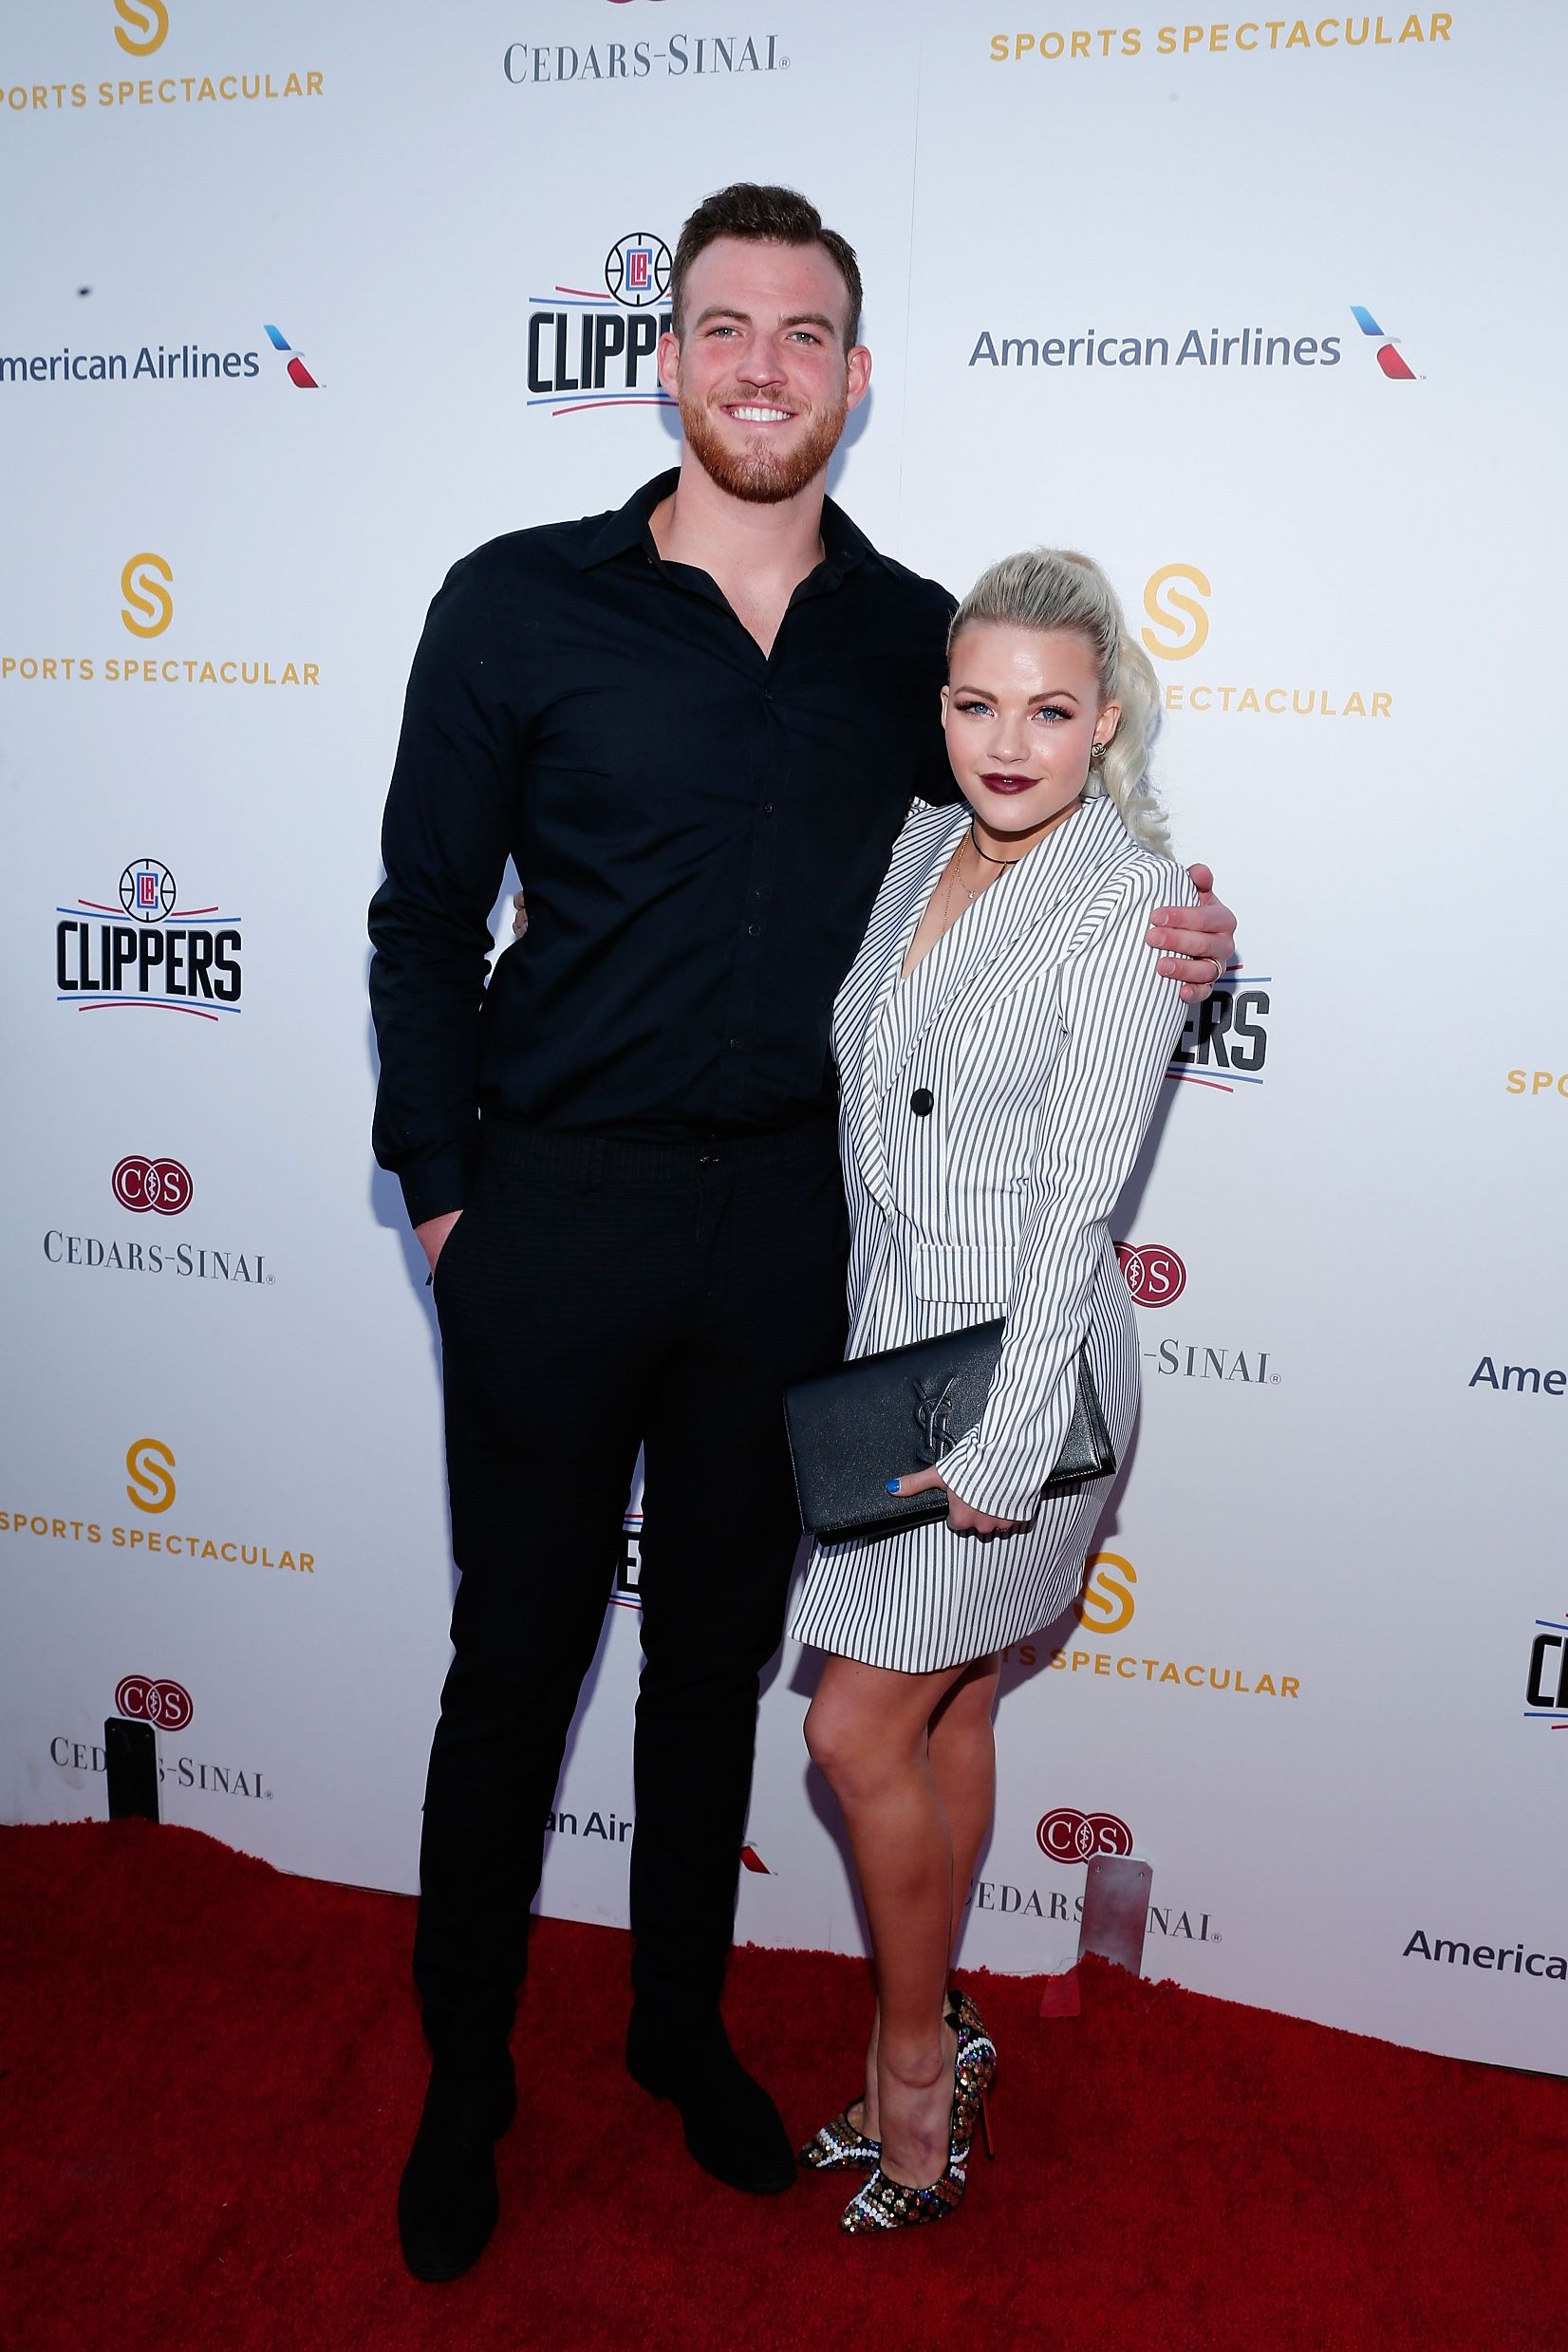 Carson McAllister and Witney Carson at the Cedars-Sinai Sports Spectacular in West Beverly Hills on March 25, 2016. | Getty Images